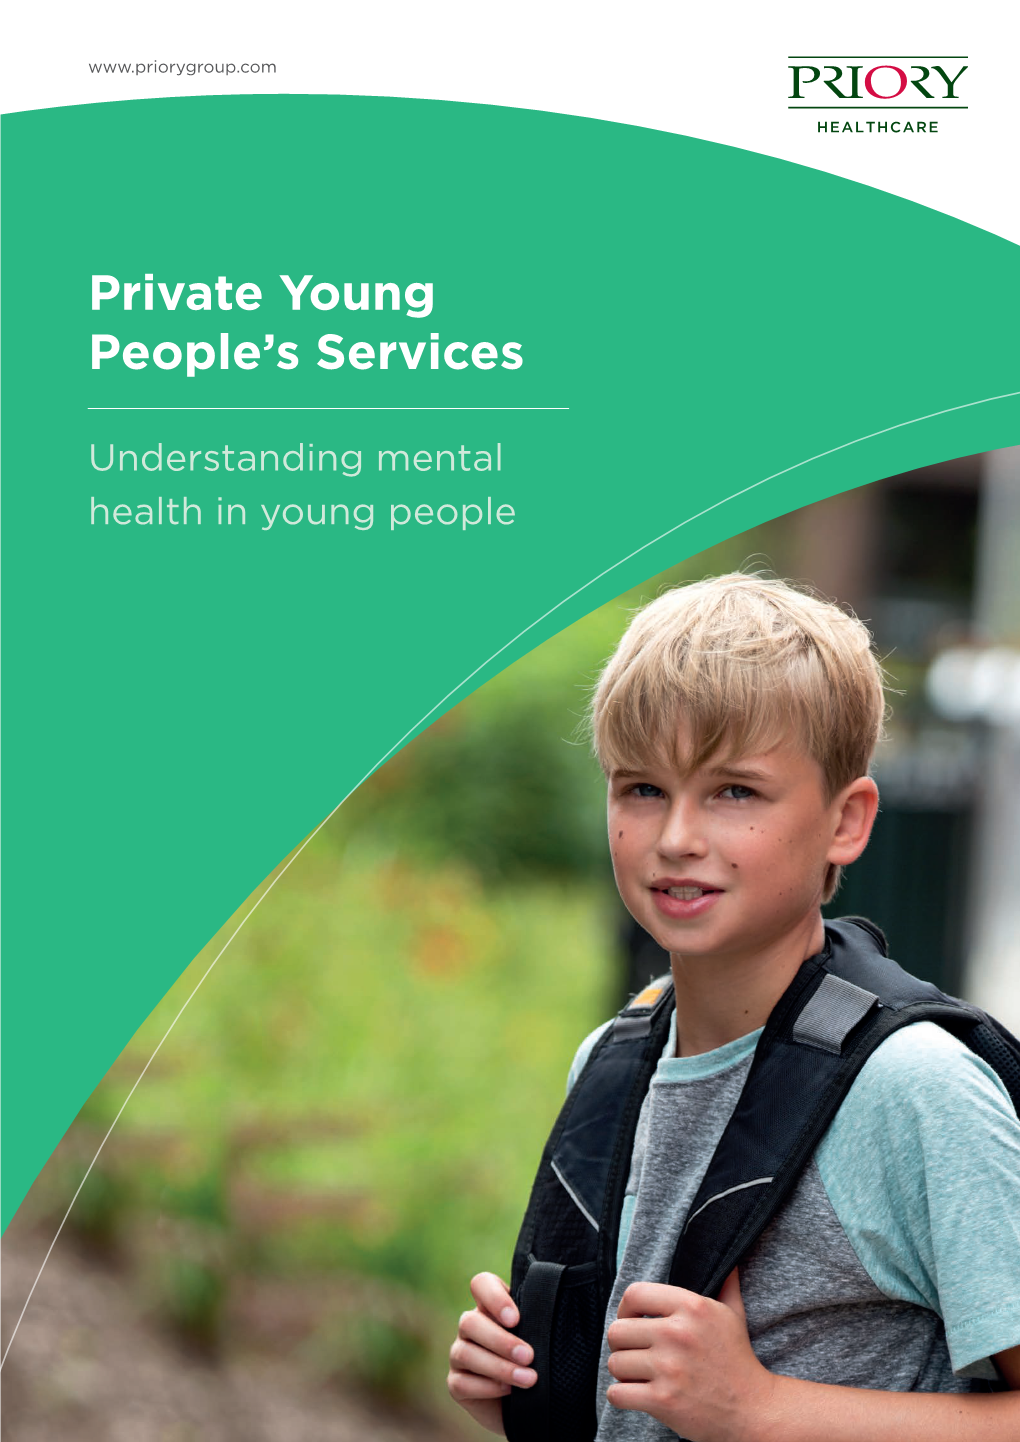 Private Young People's Services